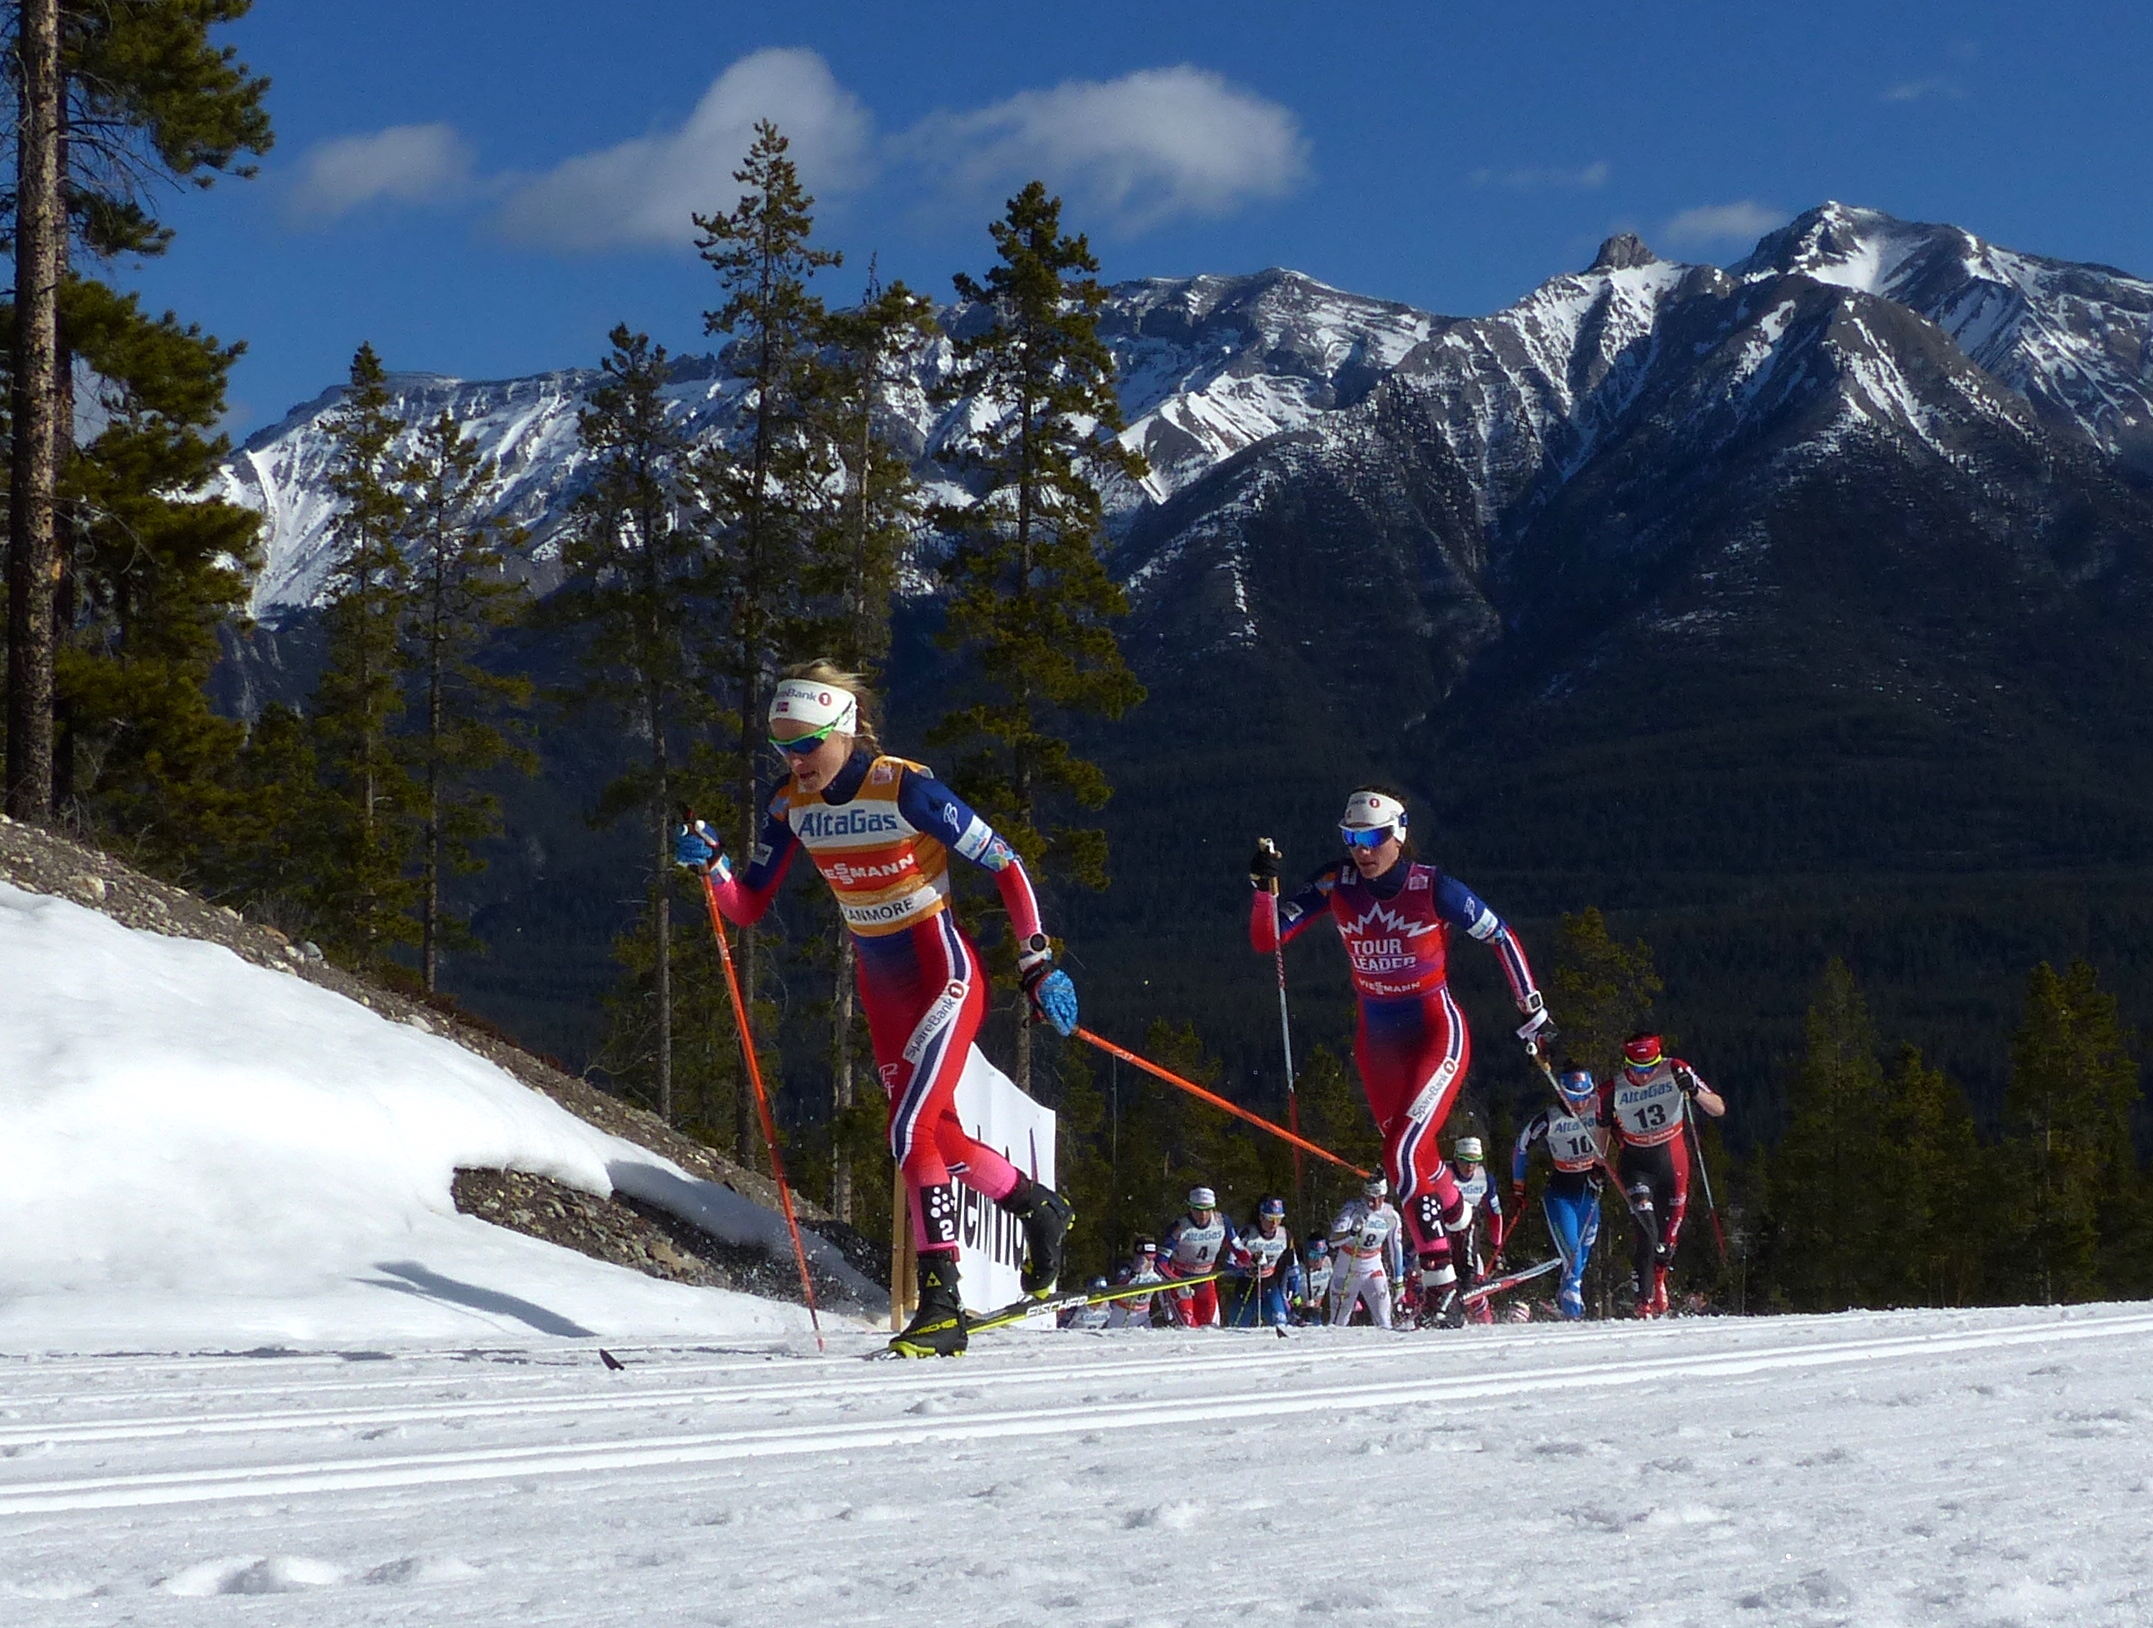 Therese Johaug leading Heidi Weng in the Ski Tour Canada. (Photo: Peggy Hung)